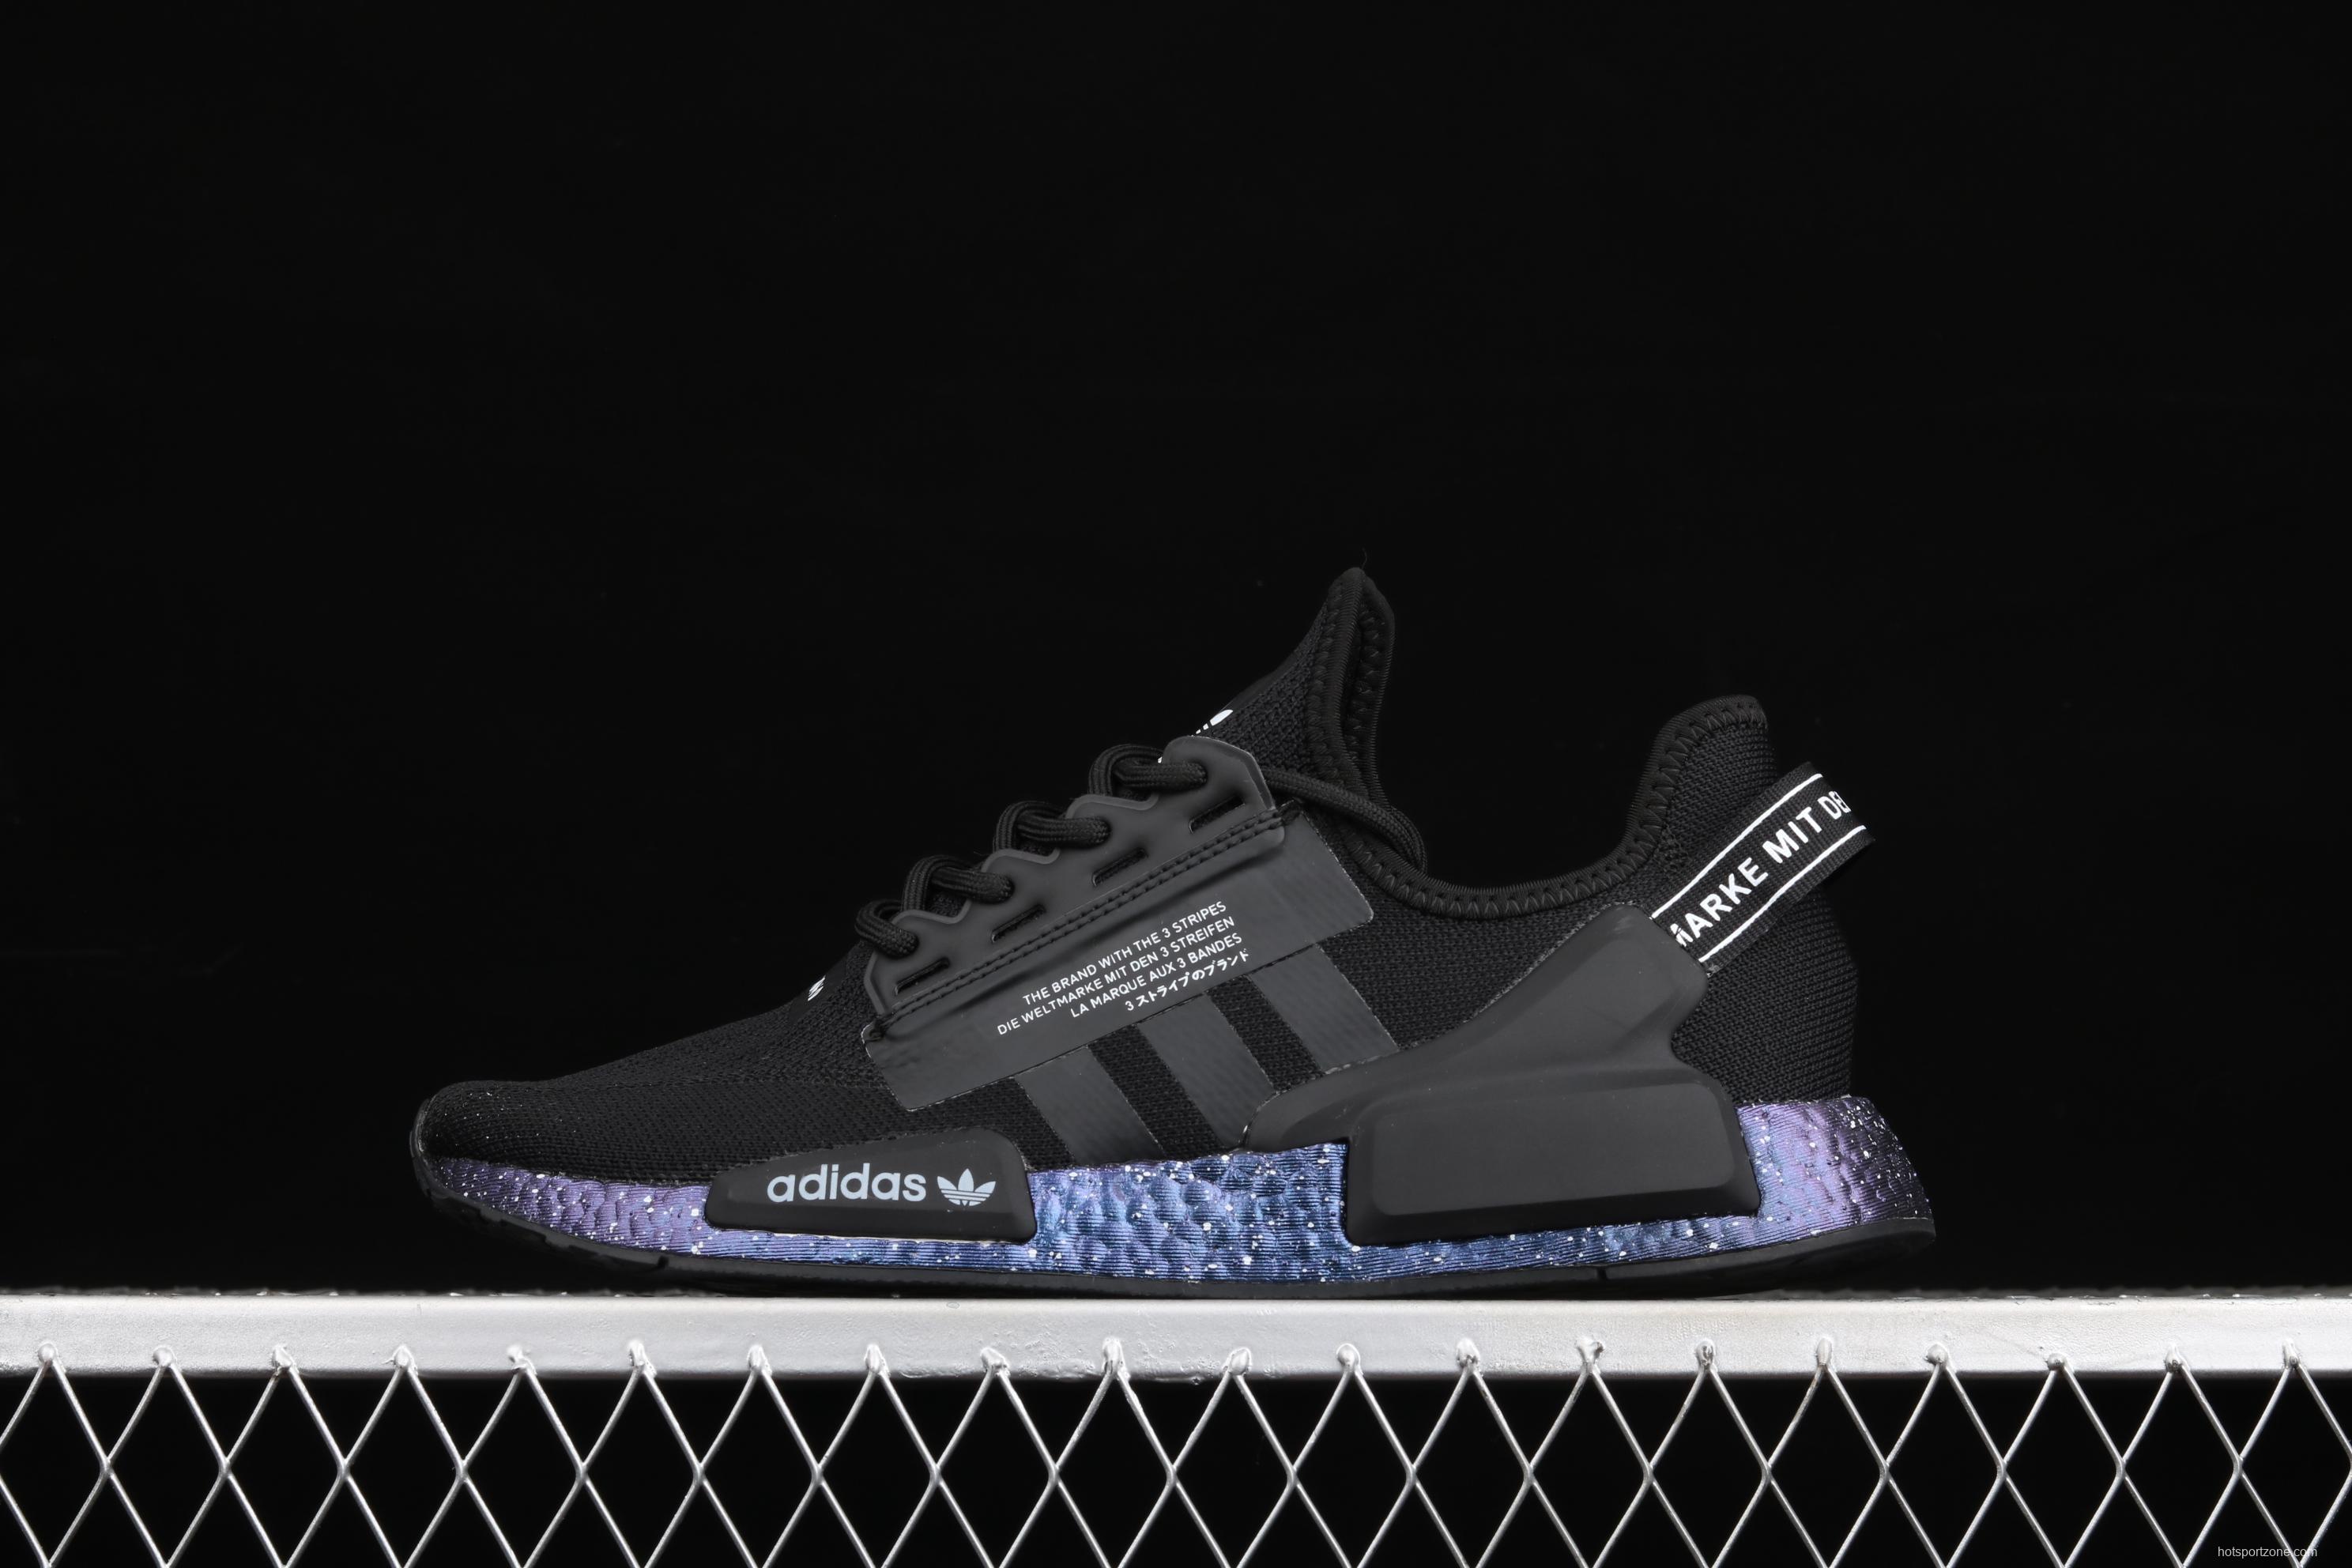 Adidas NMD R1 Boost V2 GX5164 second generation elastic knitted face running shoes